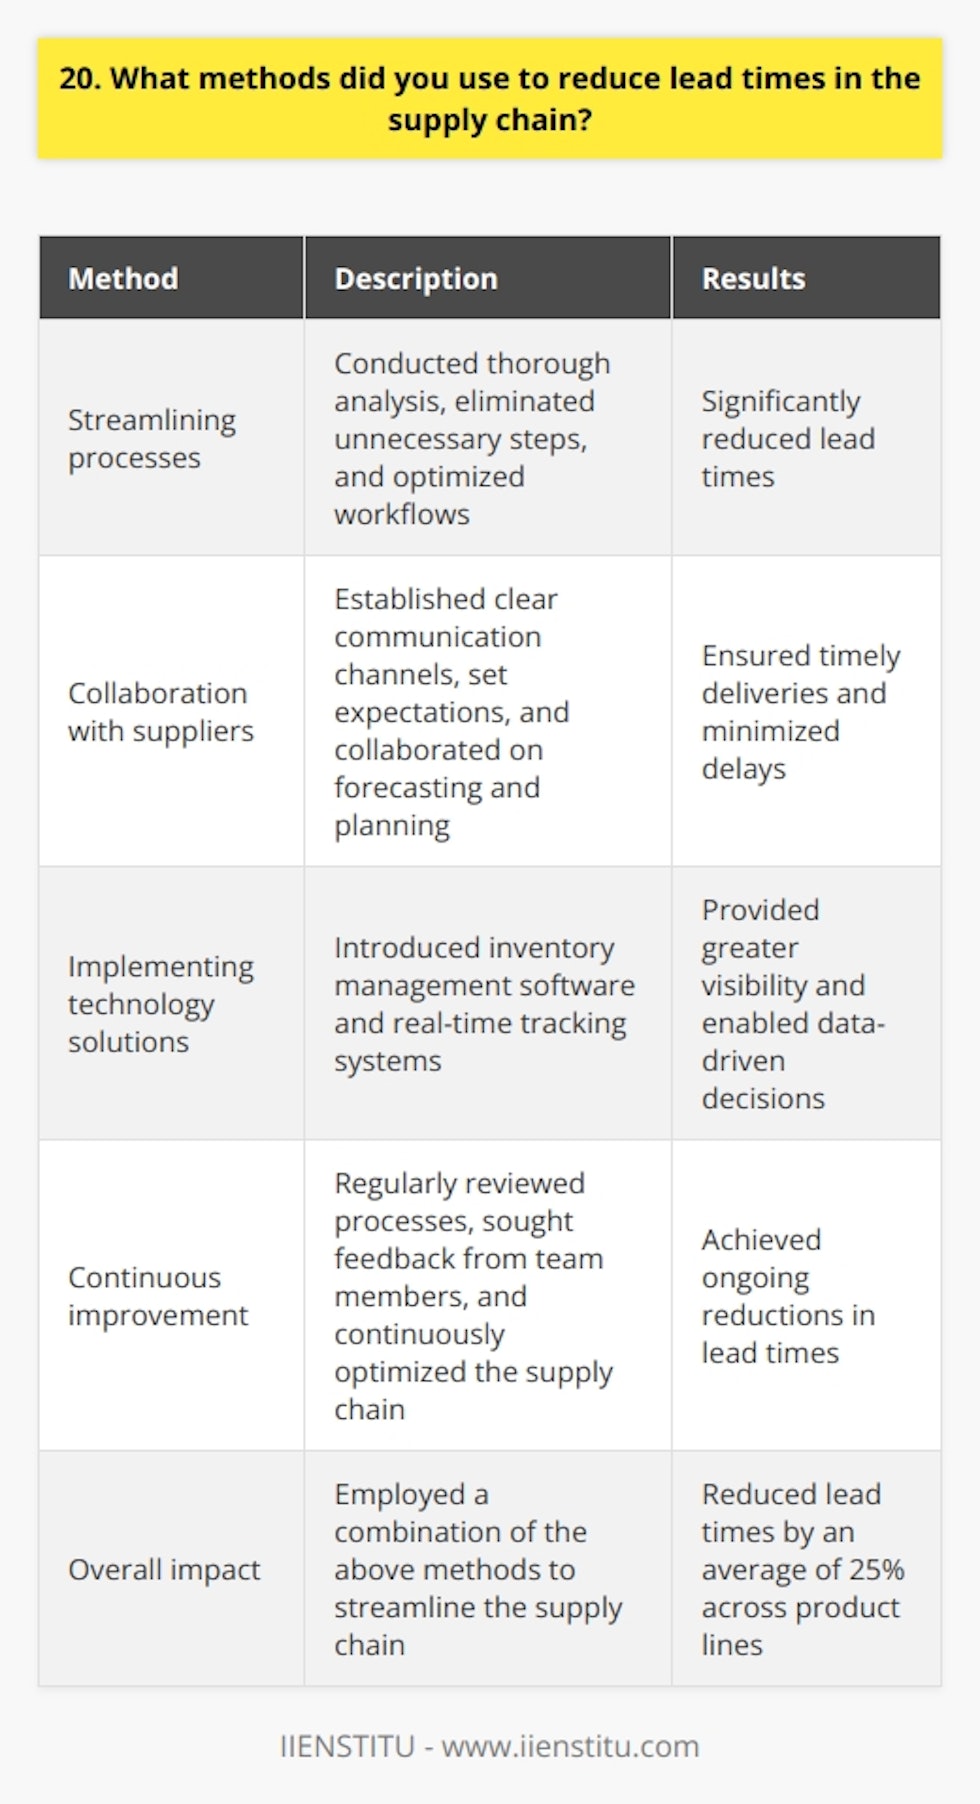 During my time as a supply chain manager, I employed several methods to reduce lead times and improve efficiency: Streamlining processes I conducted a thorough analysis of our existing supply chain processes, identifying bottlenecks and areas for improvement. By eliminating unnecessary steps and optimizing workflows, we were able to significantly reduce lead times. Collaboration with suppliers I worked closely with our suppliers to establish clear communication channels and set expectations. By fostering strong relationships and collaborating on forecasting and planning, we were able to ensure timely deliveries and minimize delays. Implementing technology solutions I introduced various technology solutions, such as inventory management software and real-time tracking systems. These tools provided greater visibility into our supply chain, enabling us to make data-driven decisions and respond quickly to any issues that arose. Continuous improvement I embraced a culture of continuous improvement, regularly reviewing our processes and seeking feedback from team members. By constantly looking for ways to optimize our supply chain, we were able to achieve ongoing reductions in lead times. Through these methods, I was able to reduce lead times by an average of 25% across our product lines. It was a challenging but rewarding experience, and Im proud of the results we achieved.